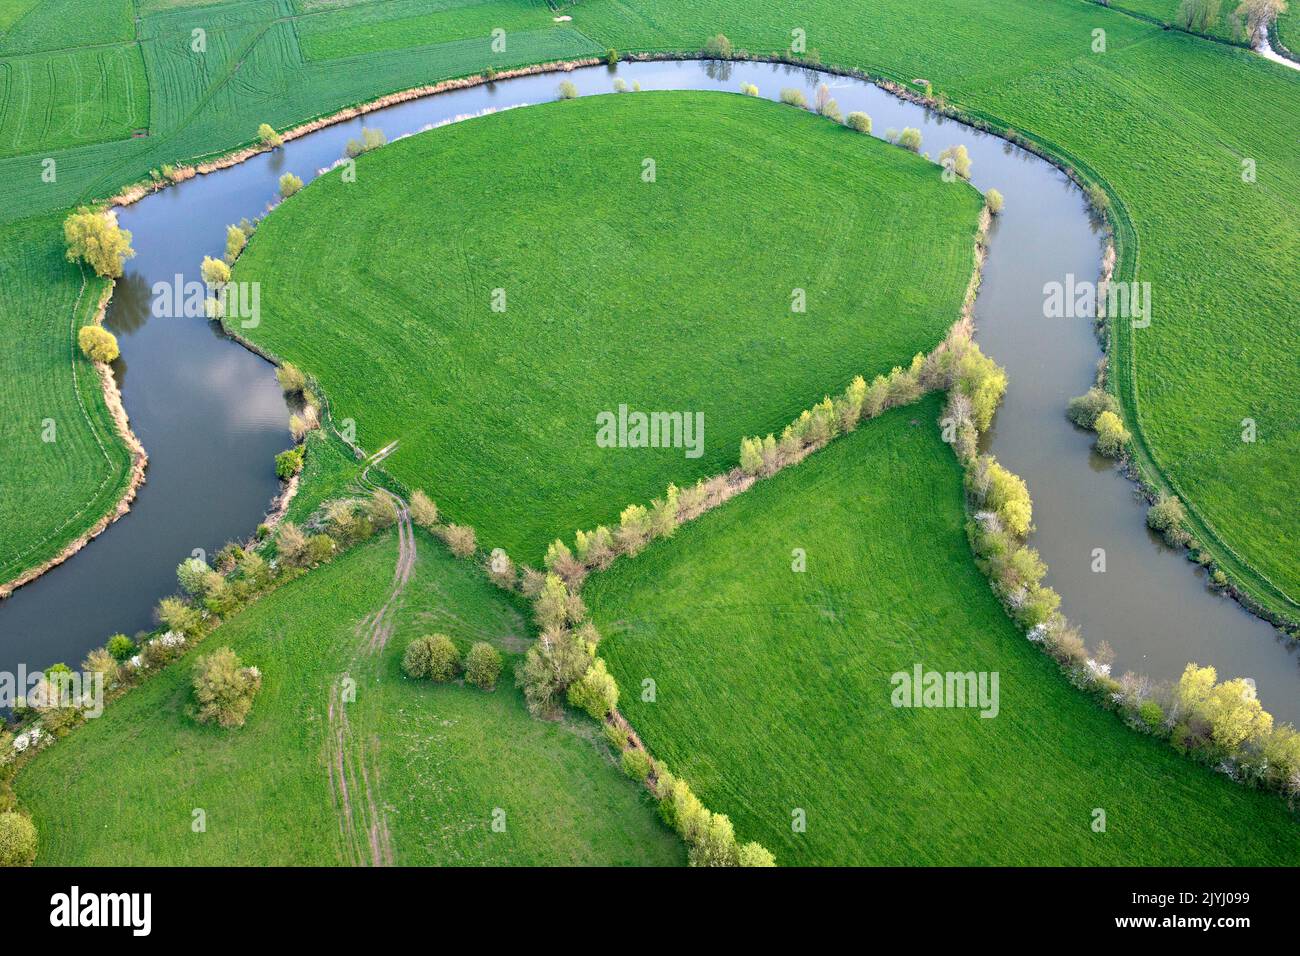 Vosselare put, old river branch of the Leie, aerial view, Belgium, Flanders Stock Photo